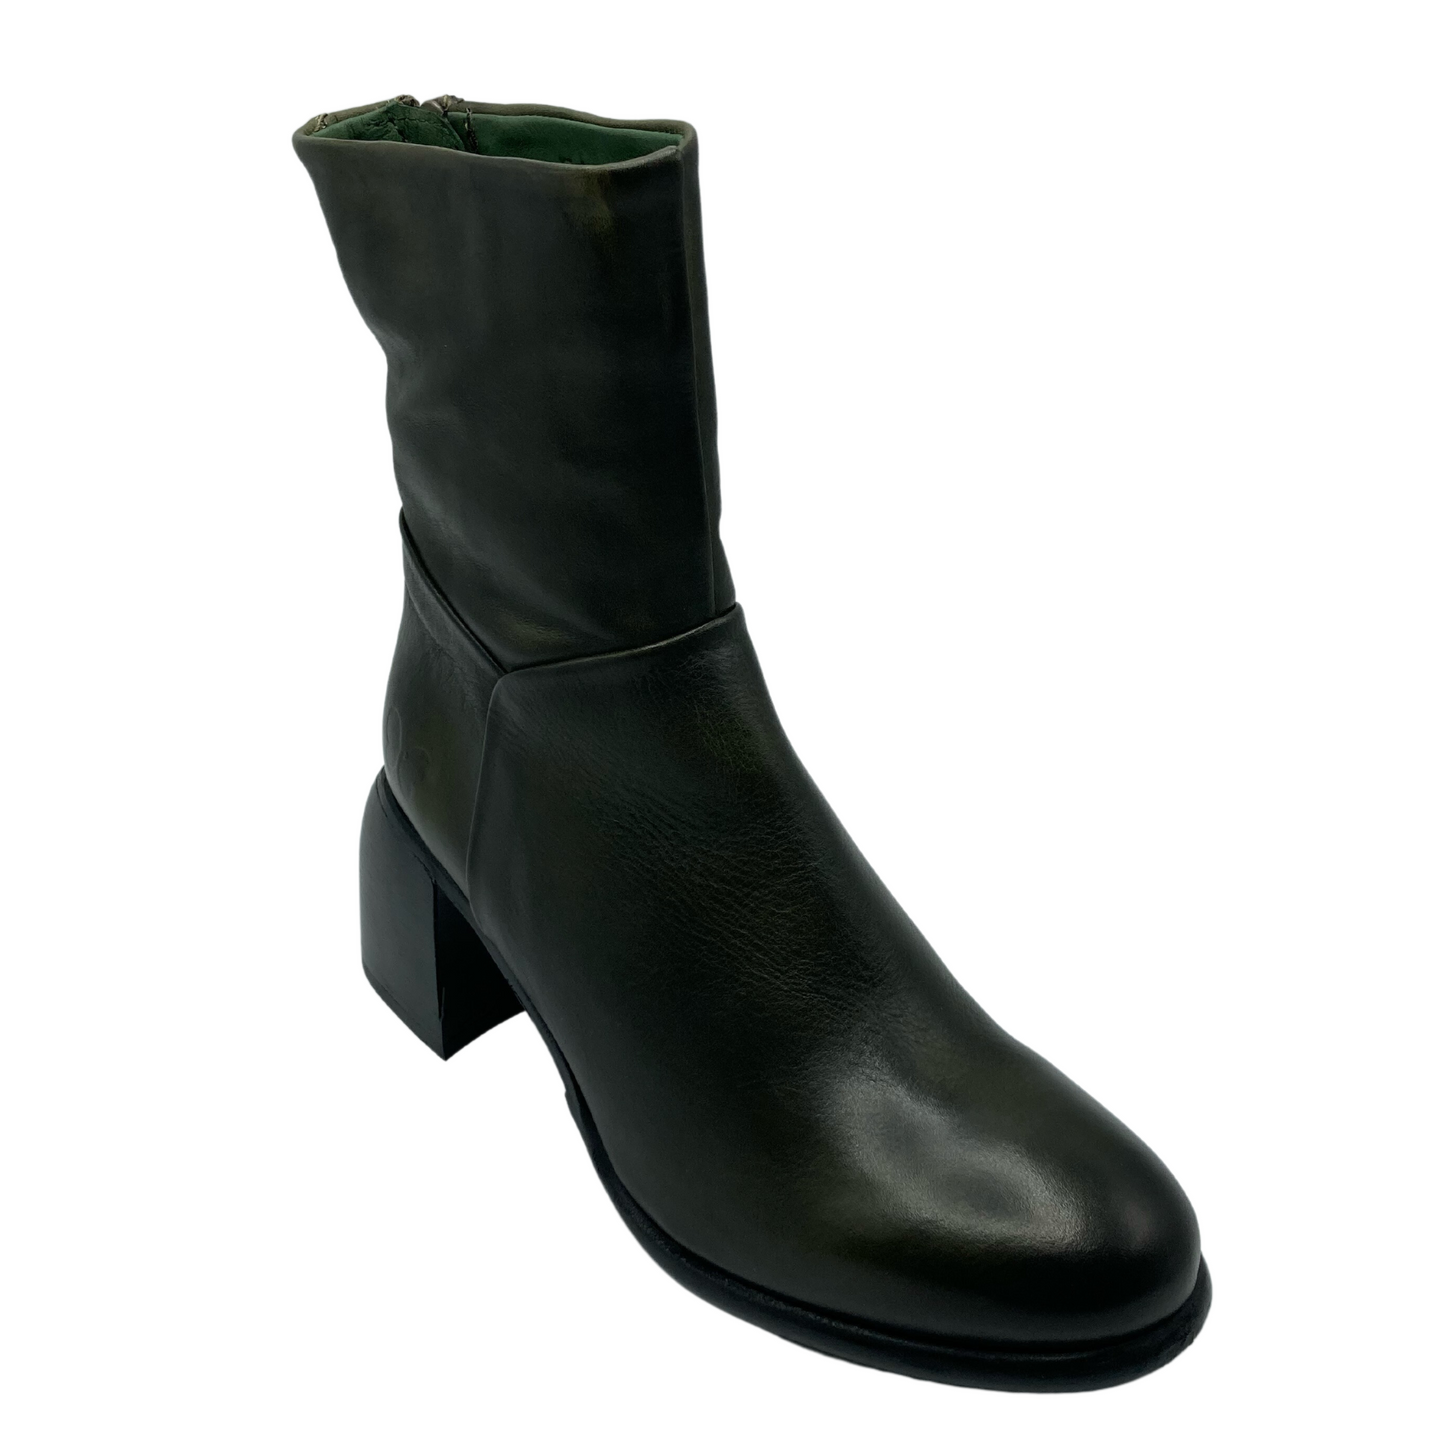 45 degree angled view of green leather short boot with rounded toe. Black sole, block heel and textile lining.